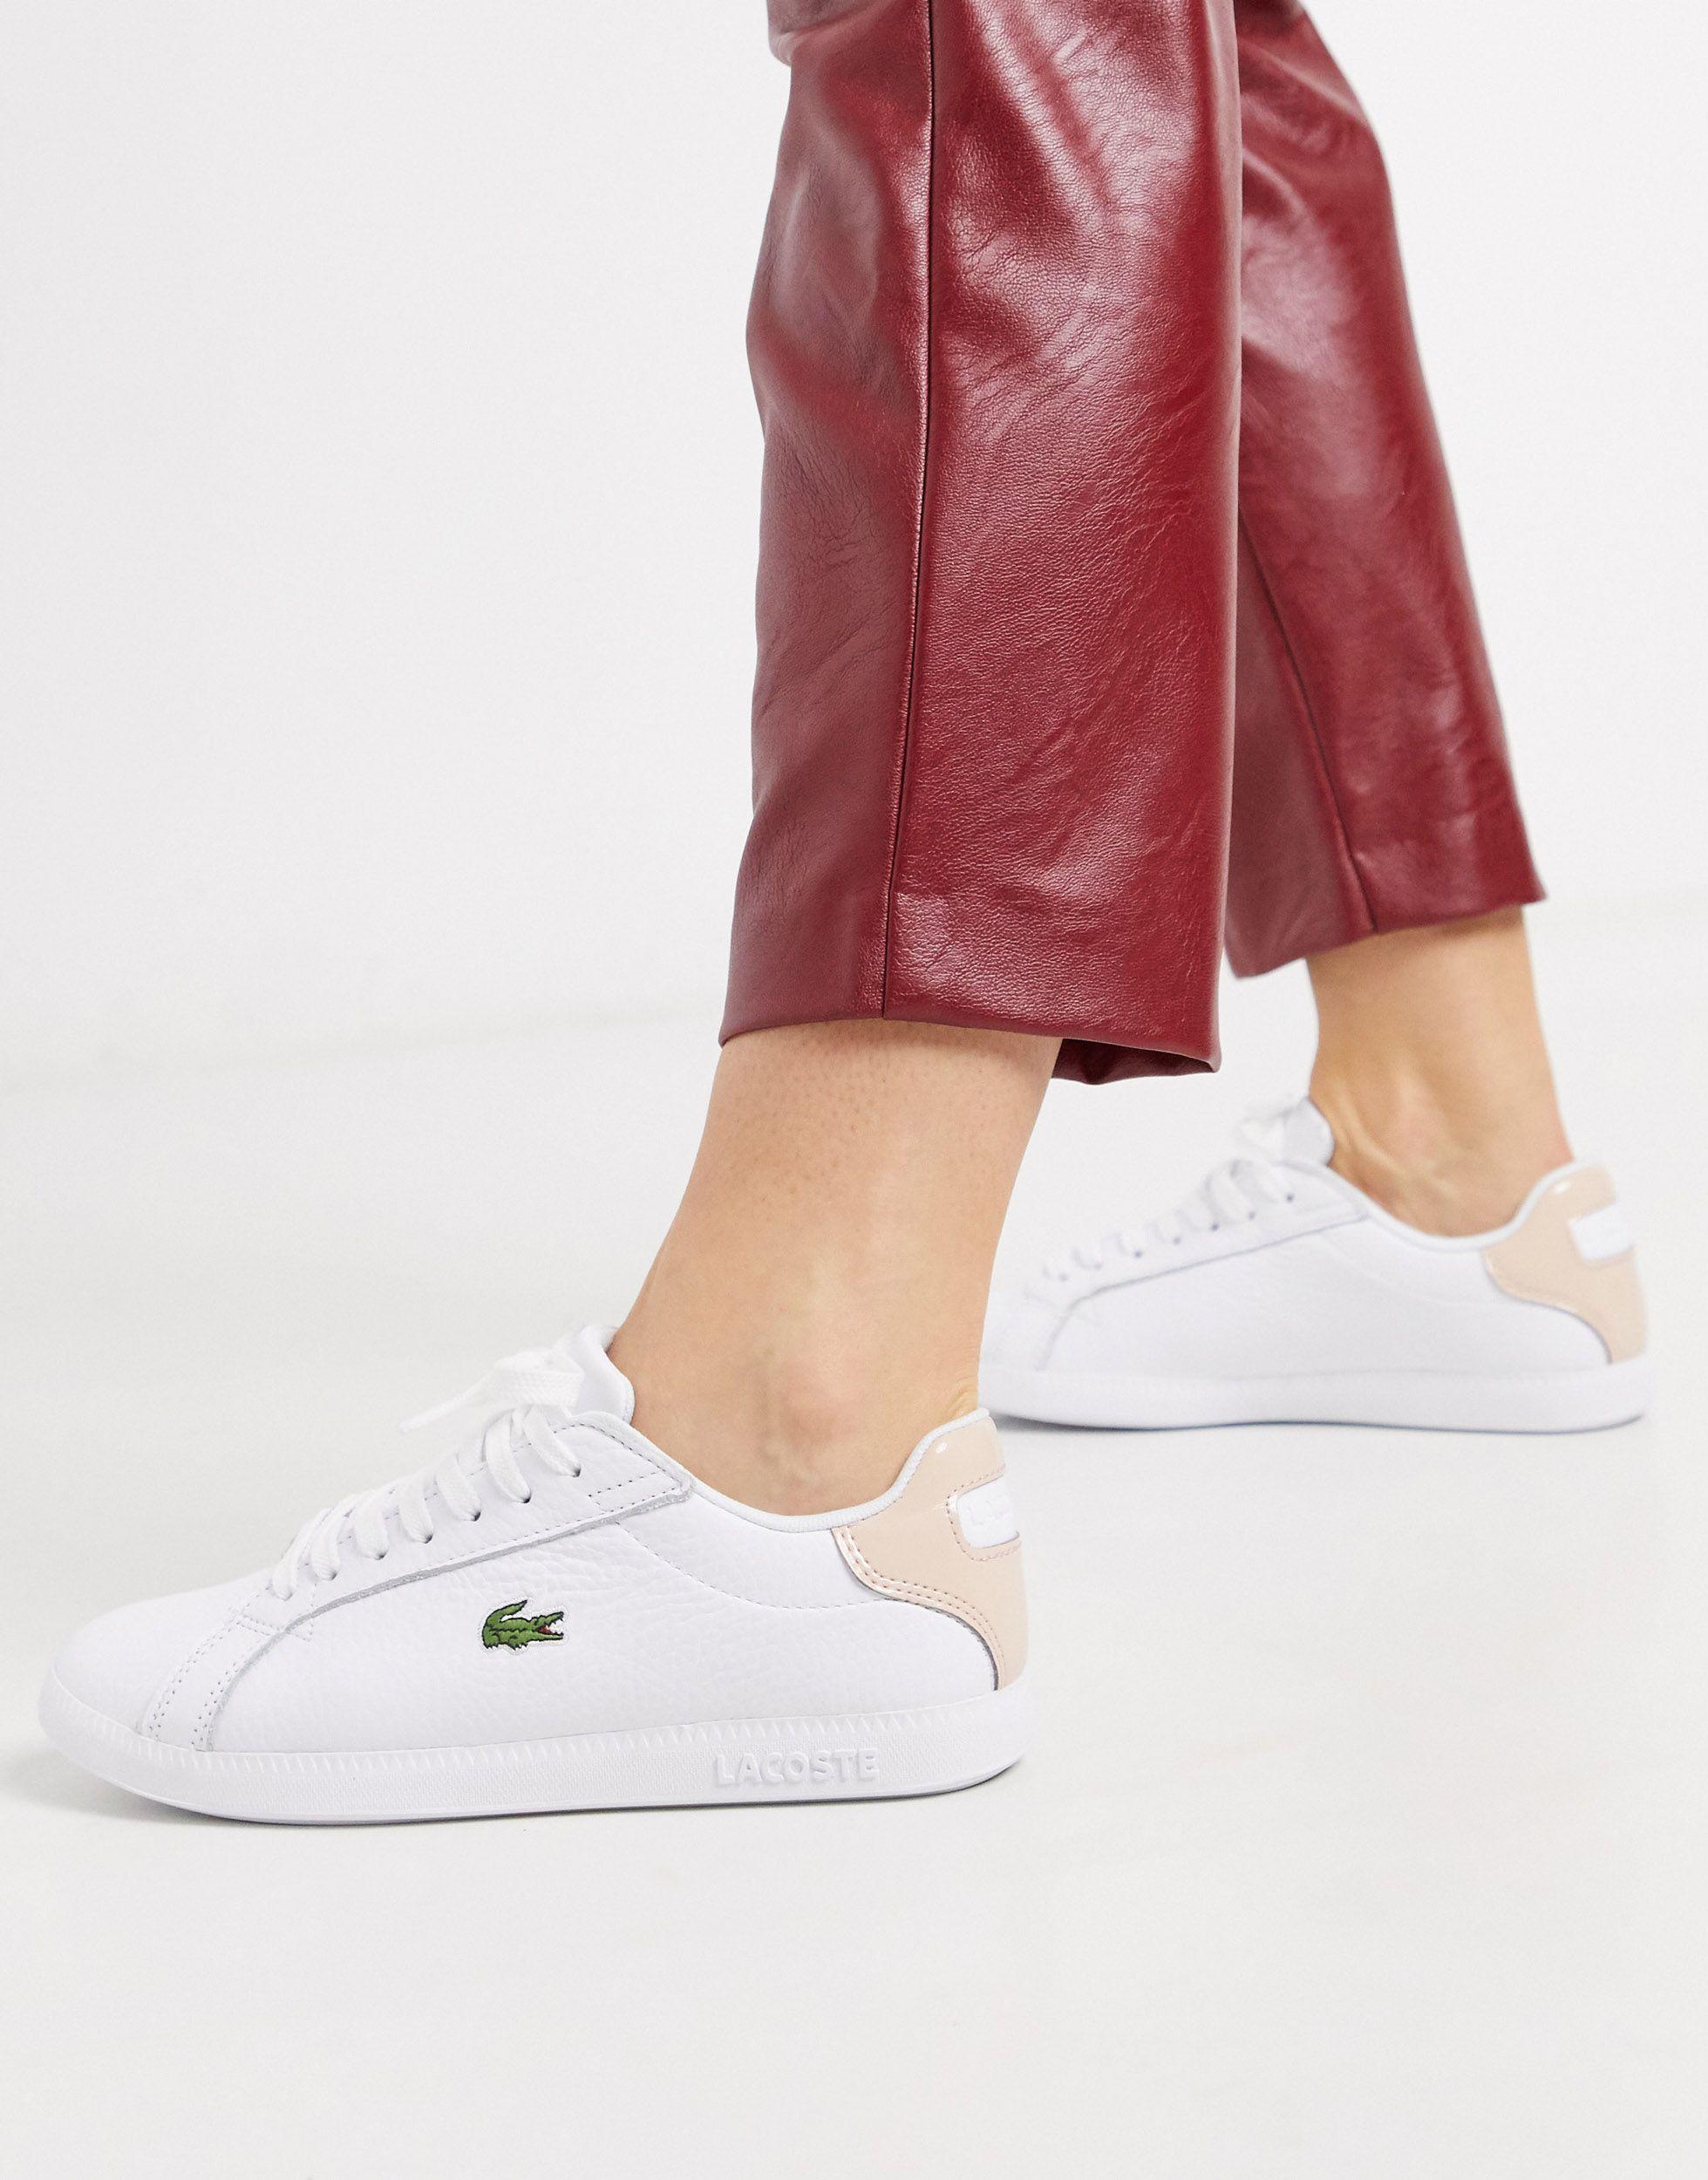 Lacoste Graduate 120 Trainers in White - Lyst